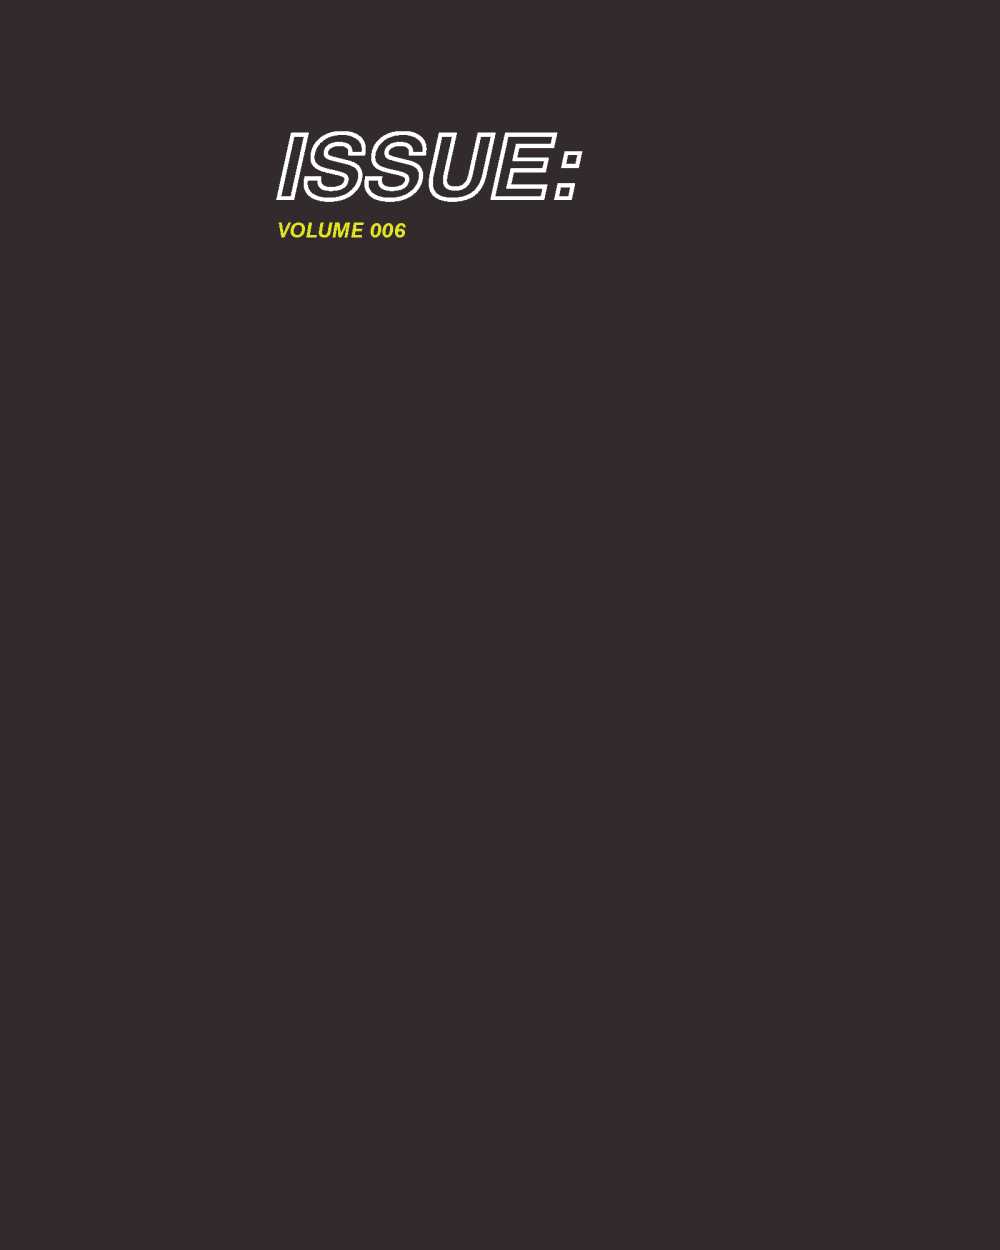 ISSUE: 006